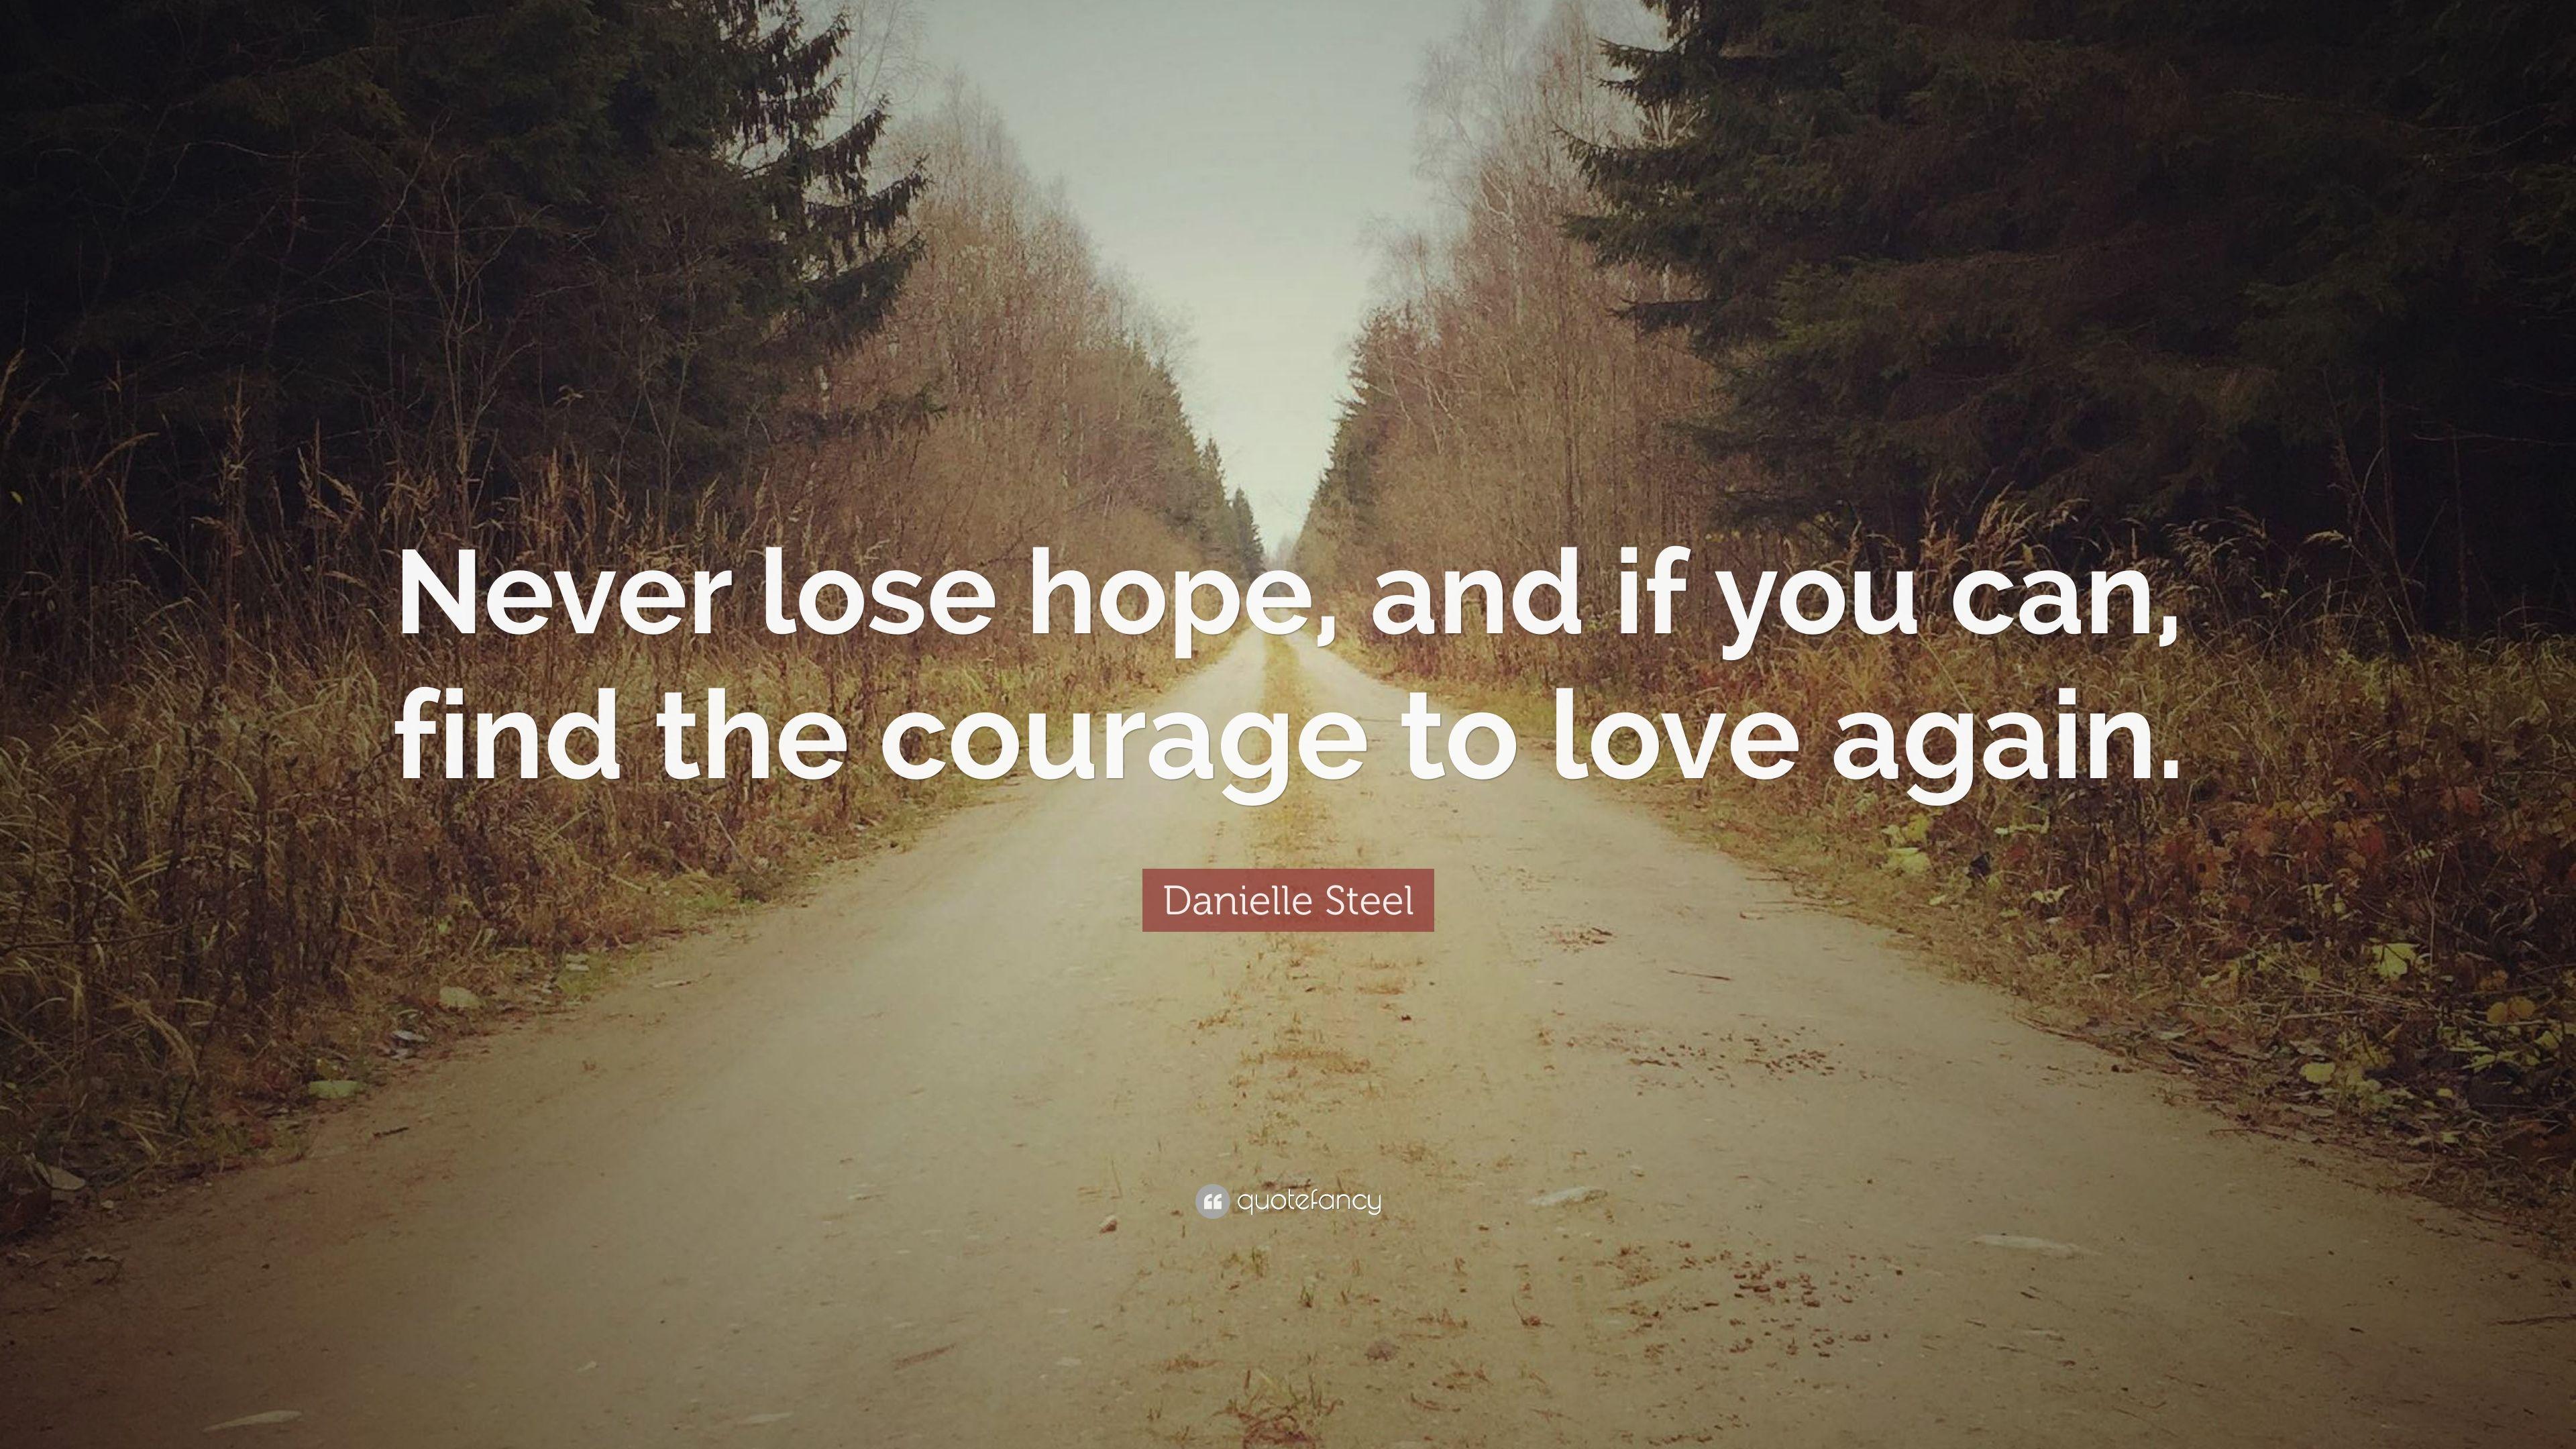 Danielle Steel Quote: “Never lose hope, and if you can, find